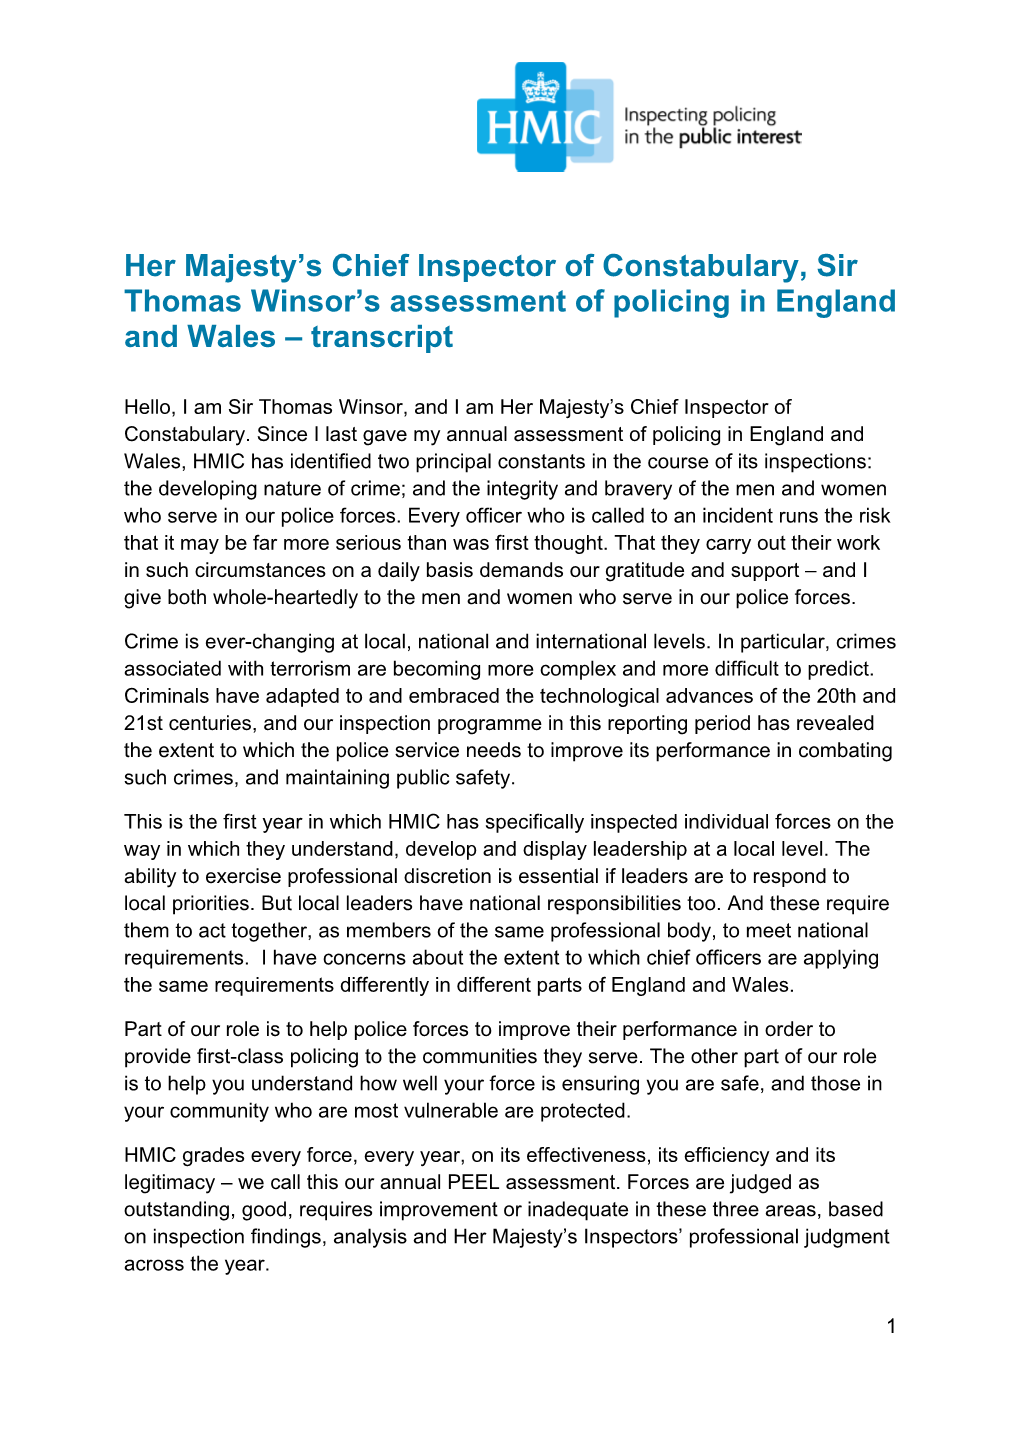 Her Majesty's Chief Inspector of Constabulary, Sir Thomas Winsor's